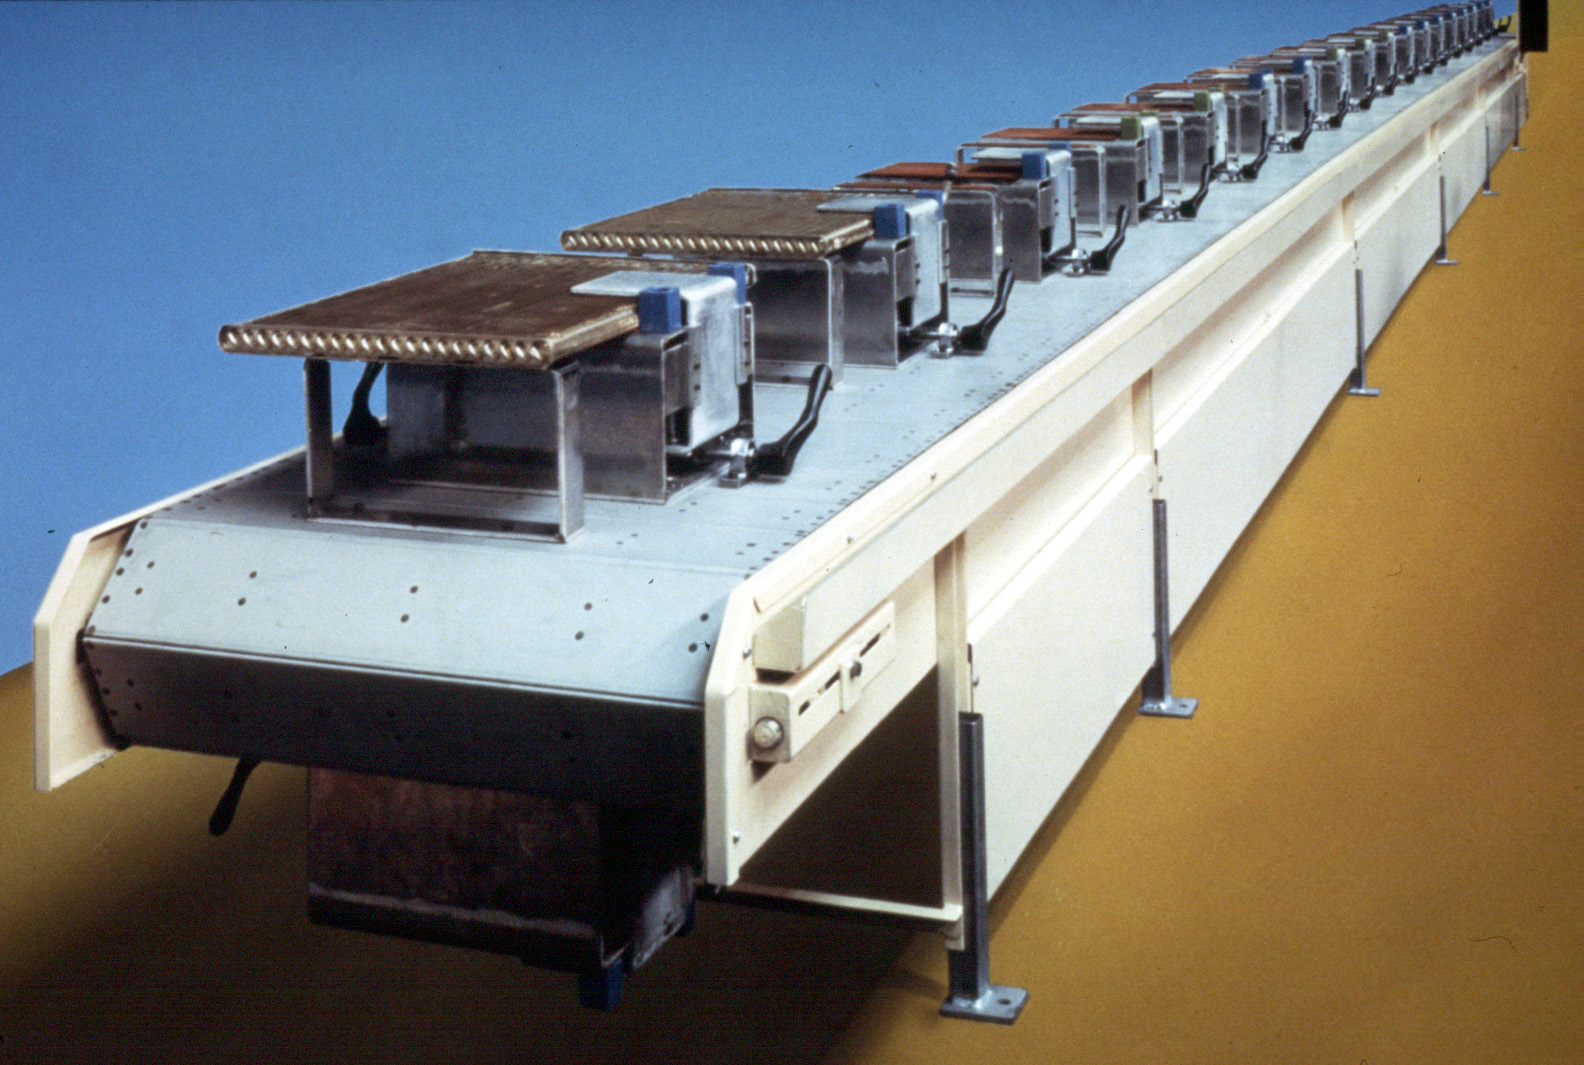 Kornylak manufactures a variety of conveyor systems for manufacturing, material handling and insulation production.